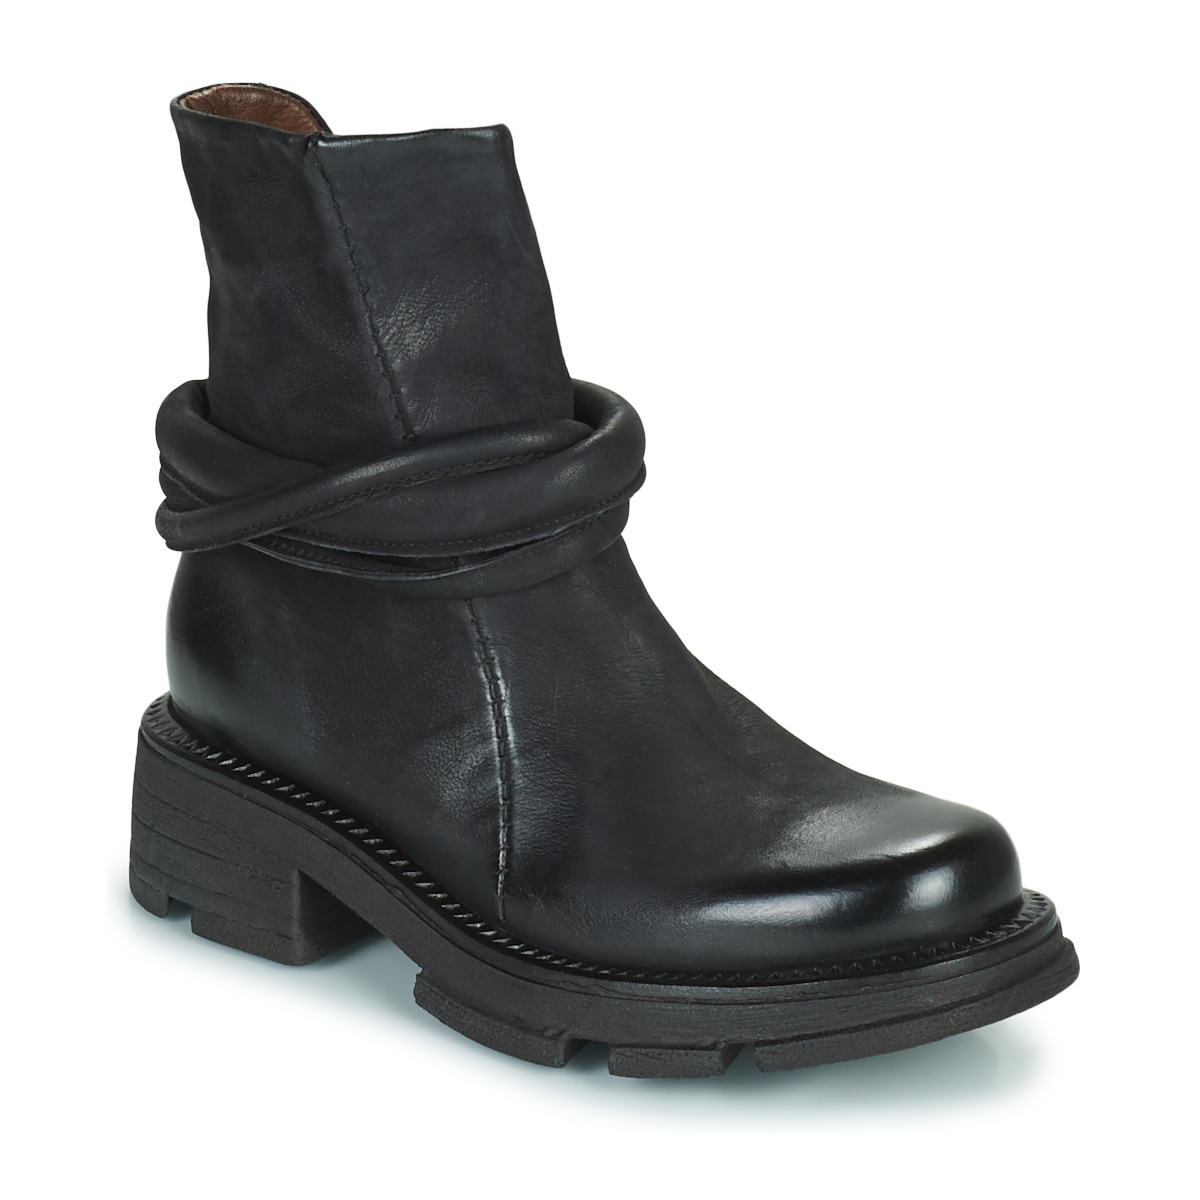 Shoes Women Mid boots Airstep / A.S.98 LANE Black